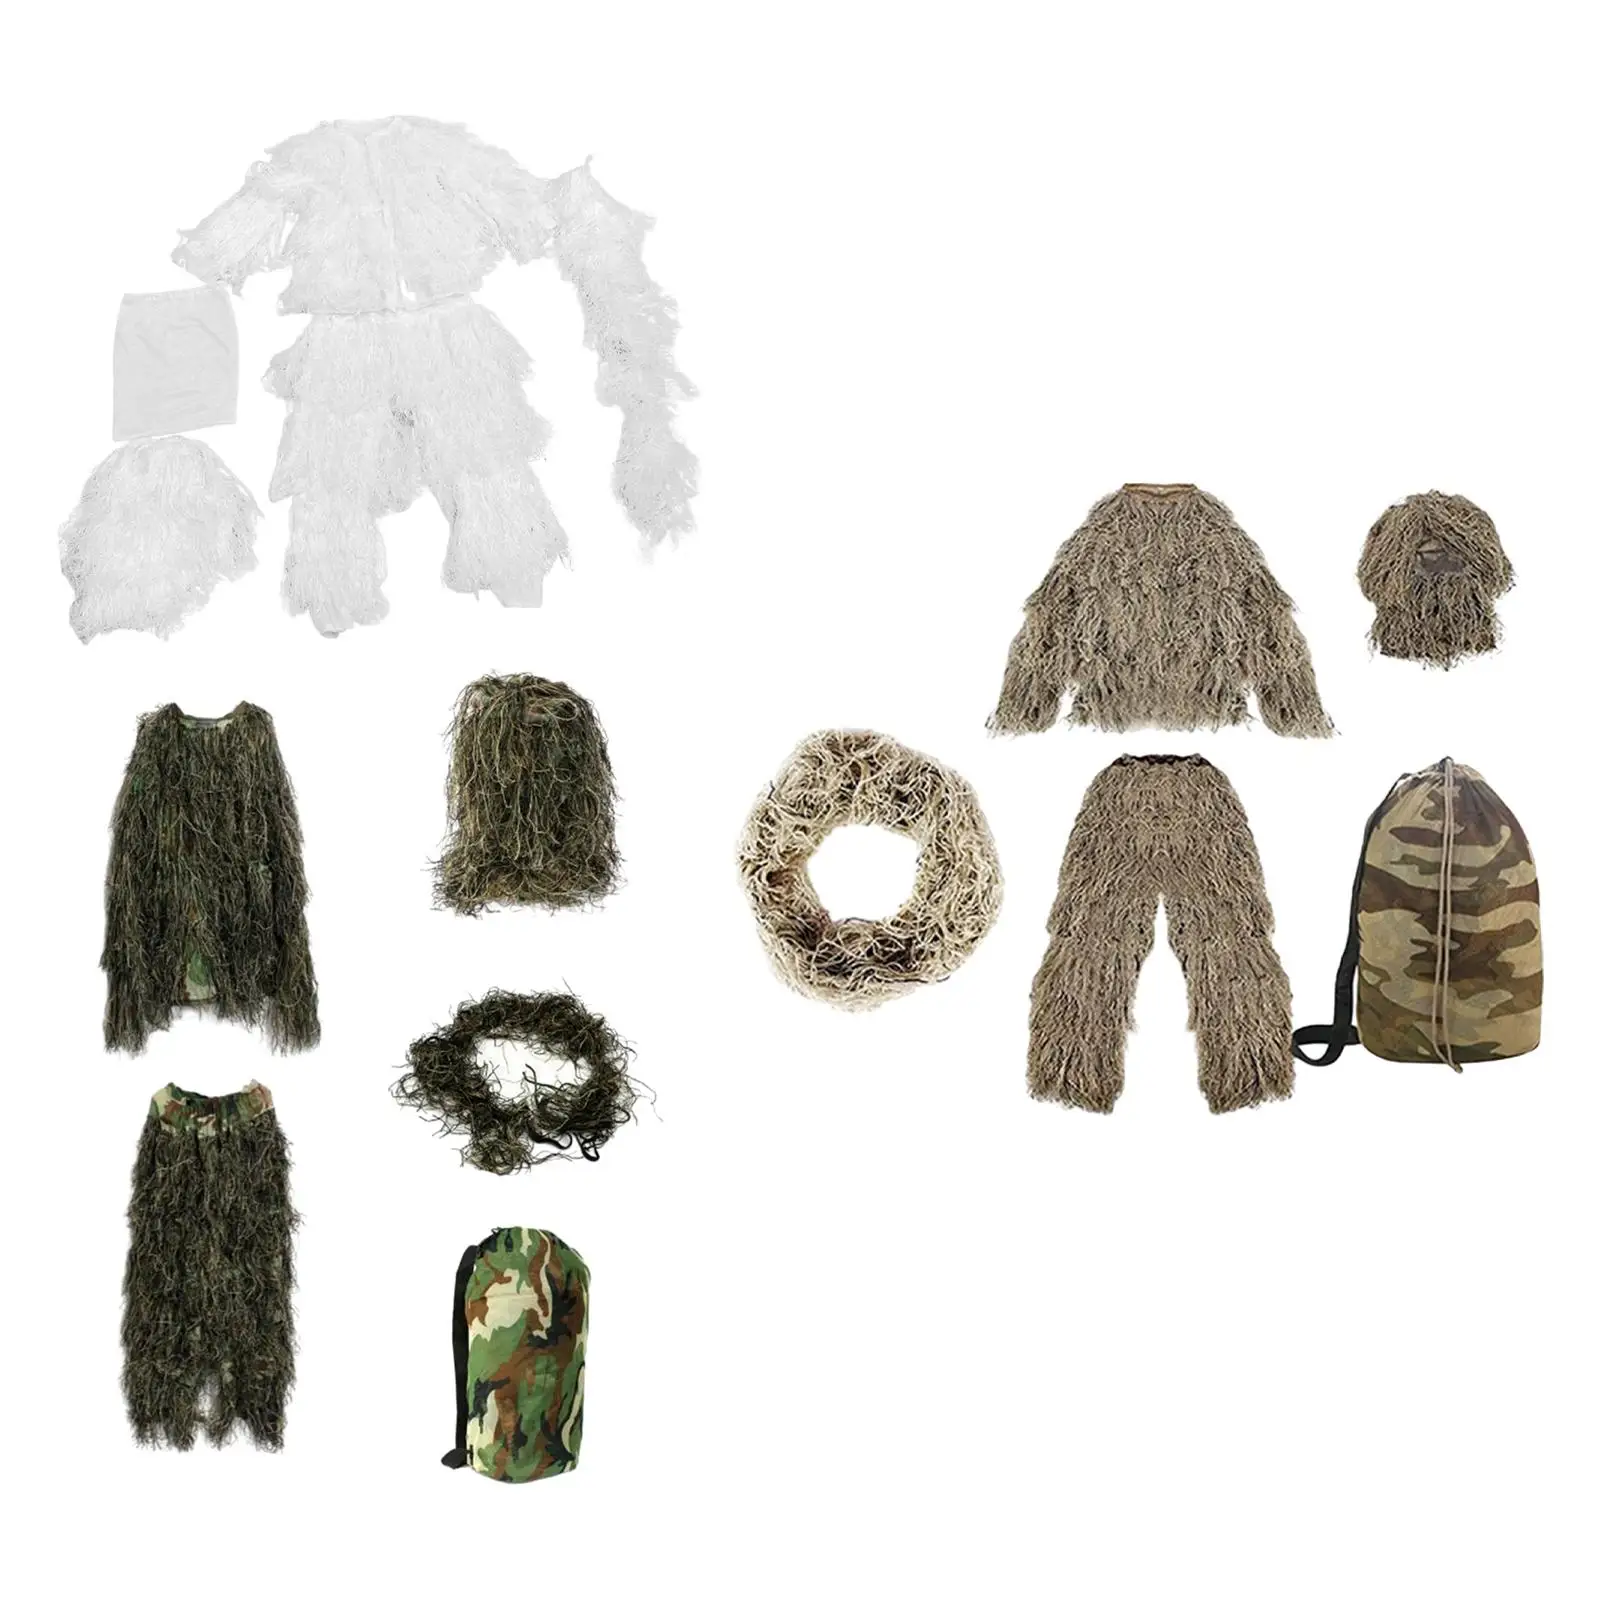 Children Ghillie Suit with Storage Bag Disguise Jacket Clothing Uniform Set for Photography Party Hunting Birdwatching Halloween